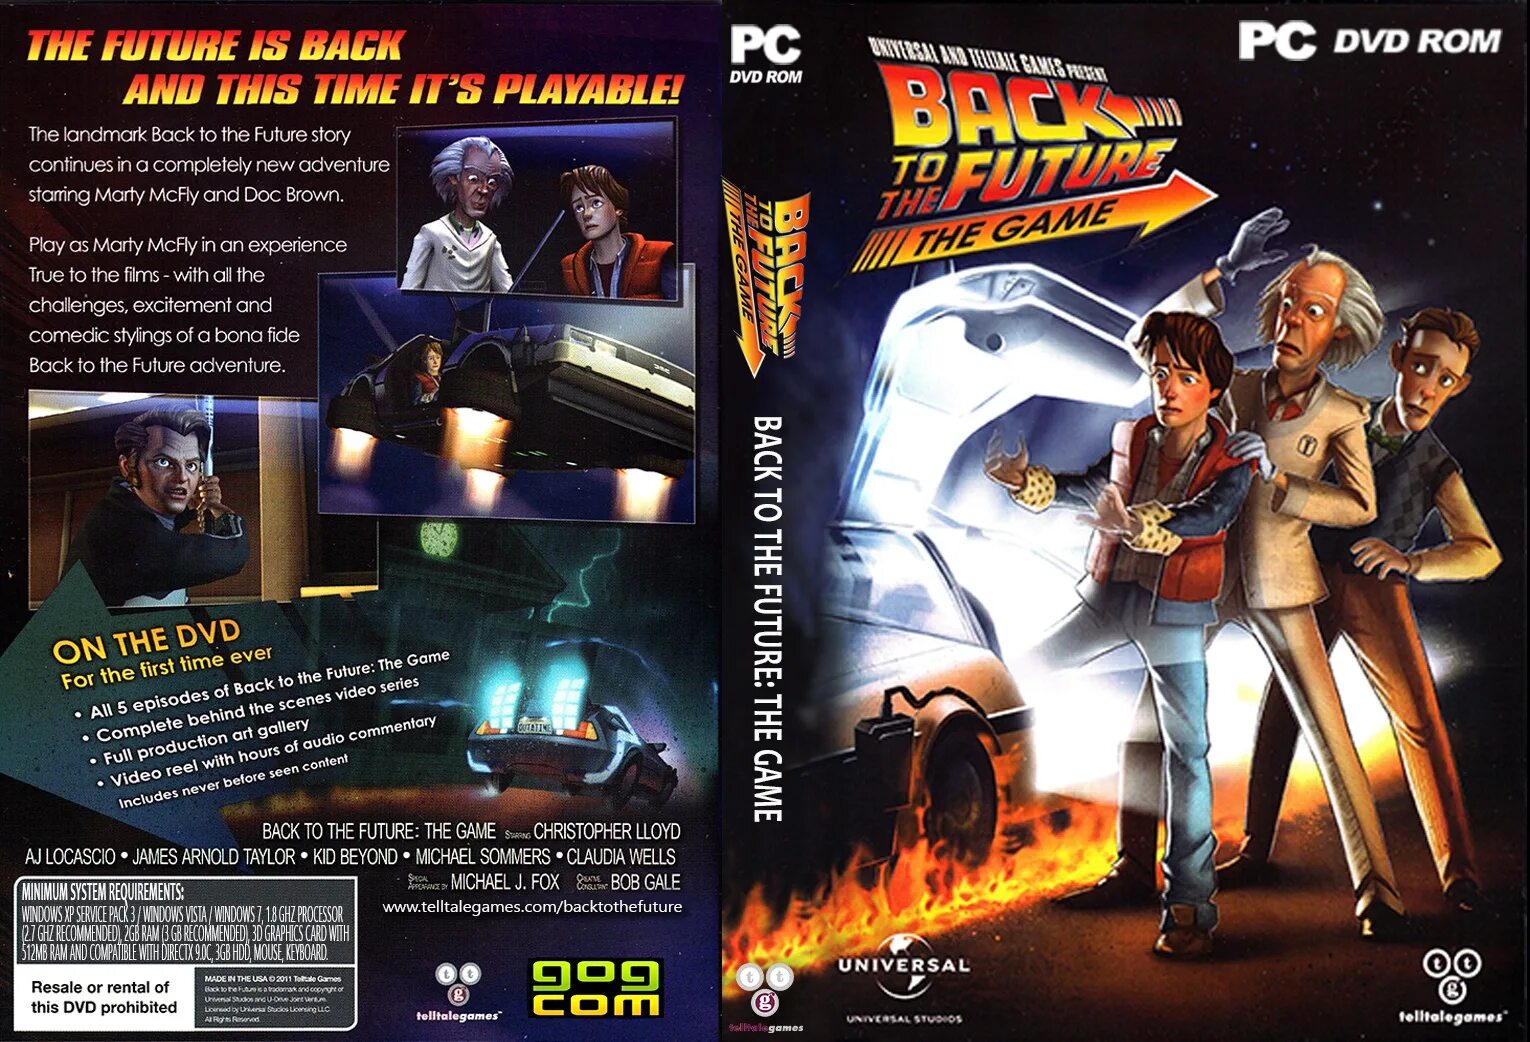 Back to the Future игра. Back to the Future the game обложка. Telltale back to the Future. Back to the Future (игра, 1989).